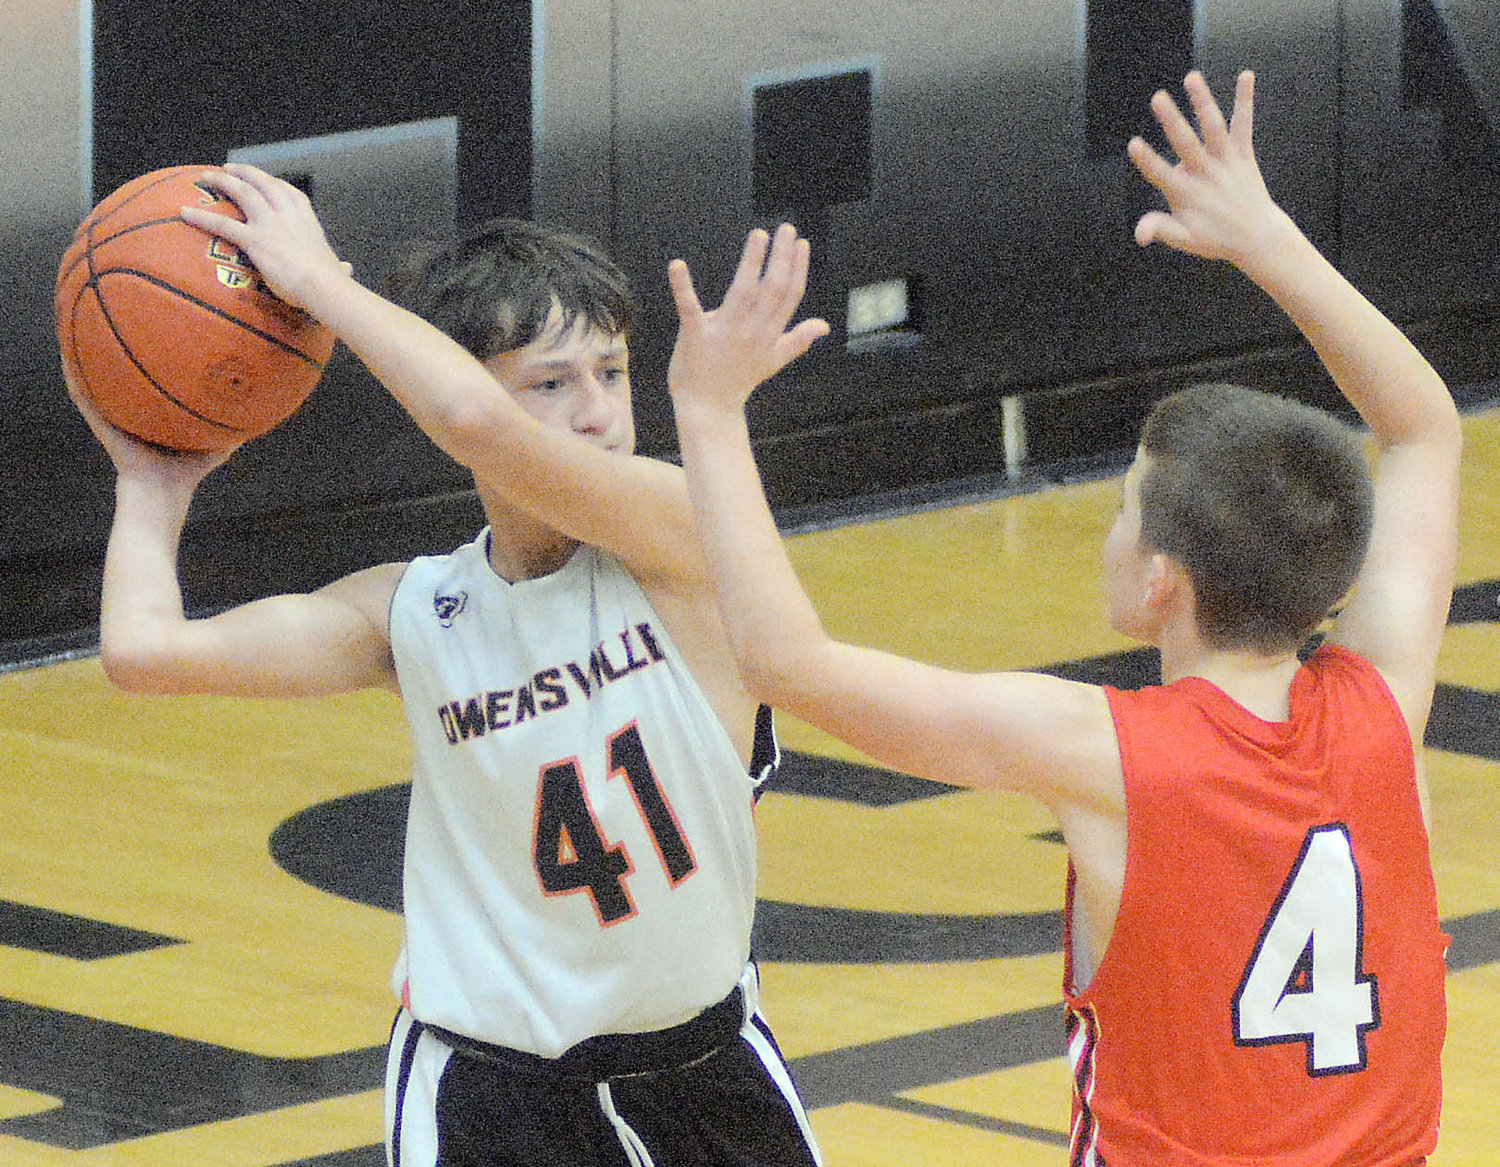 Jax johnston (far left) looks to pass the ball towards the front court for Owensville’s seventh-grade Dutchmen during home basketball action last Wednesday at Owensville High School.